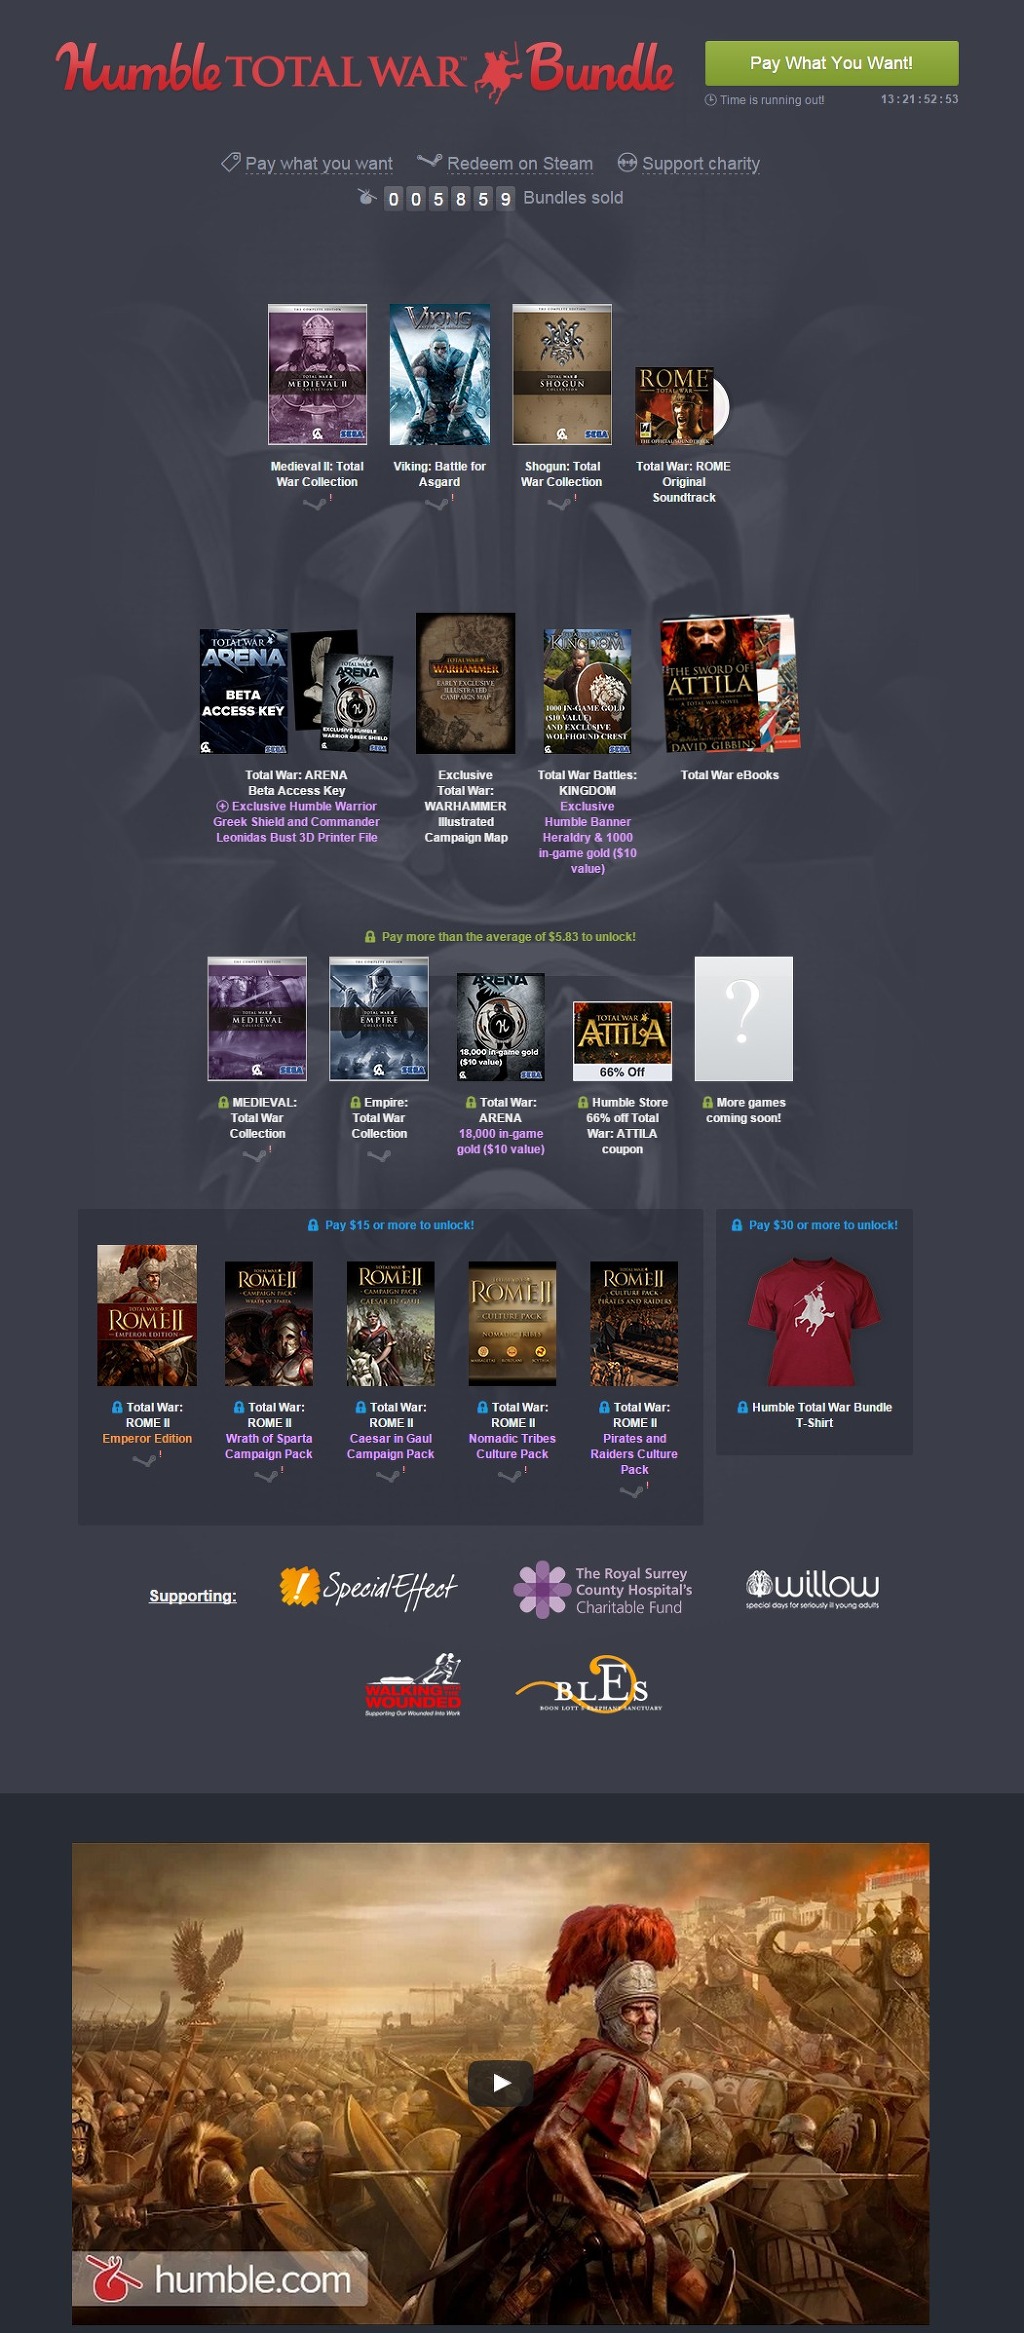 Humble_Total_War_Bundle__pay_what_you_want_and_help_charity_.jpg